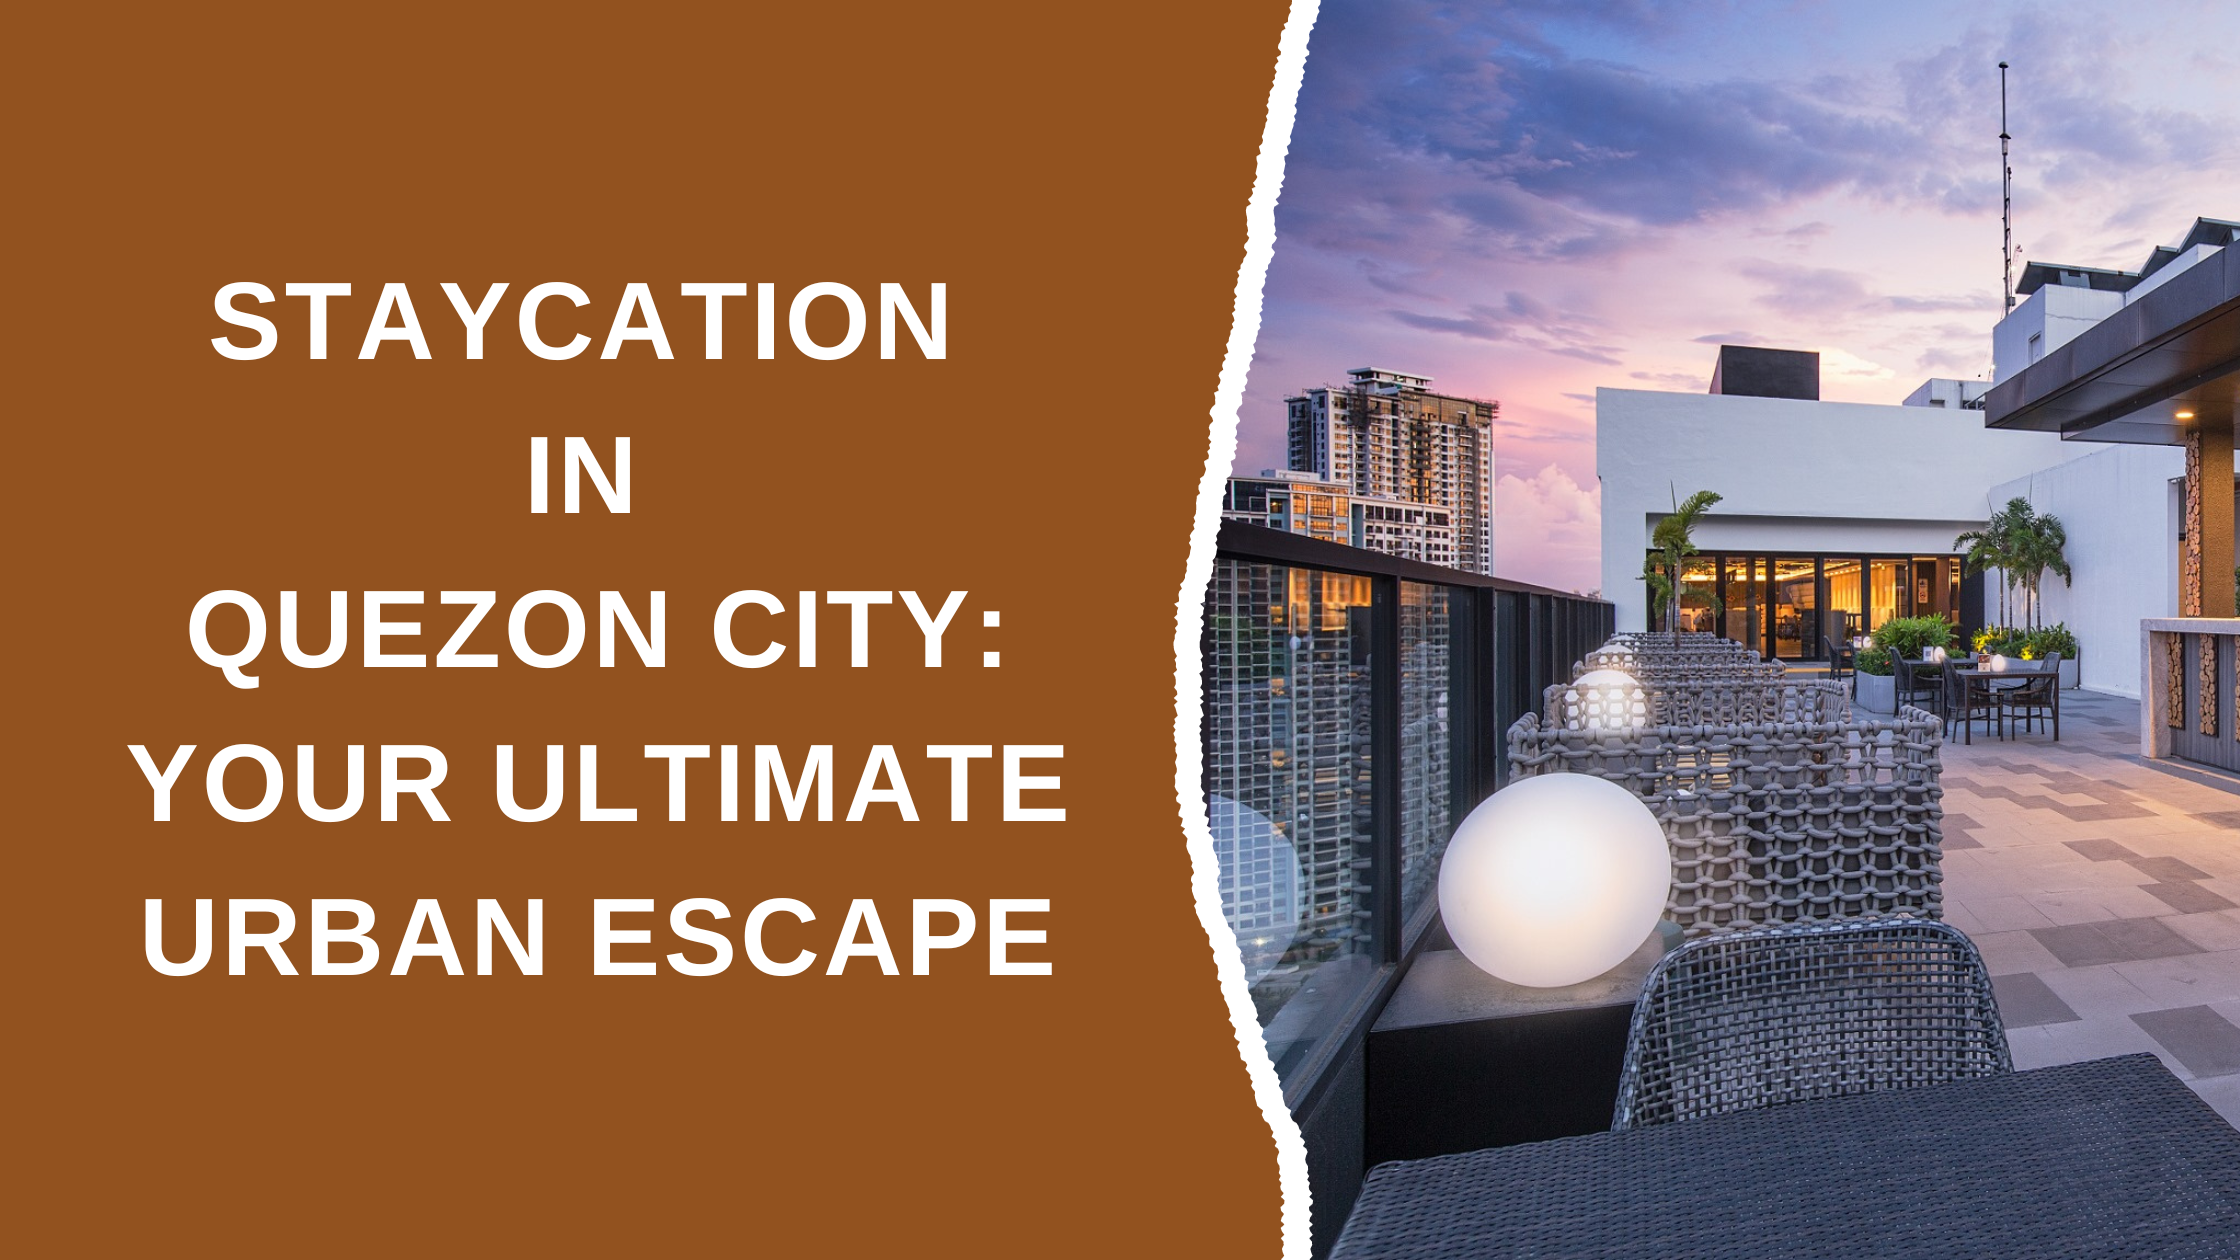 Staycation in Quezon City: Your Ultimate Urban Escape